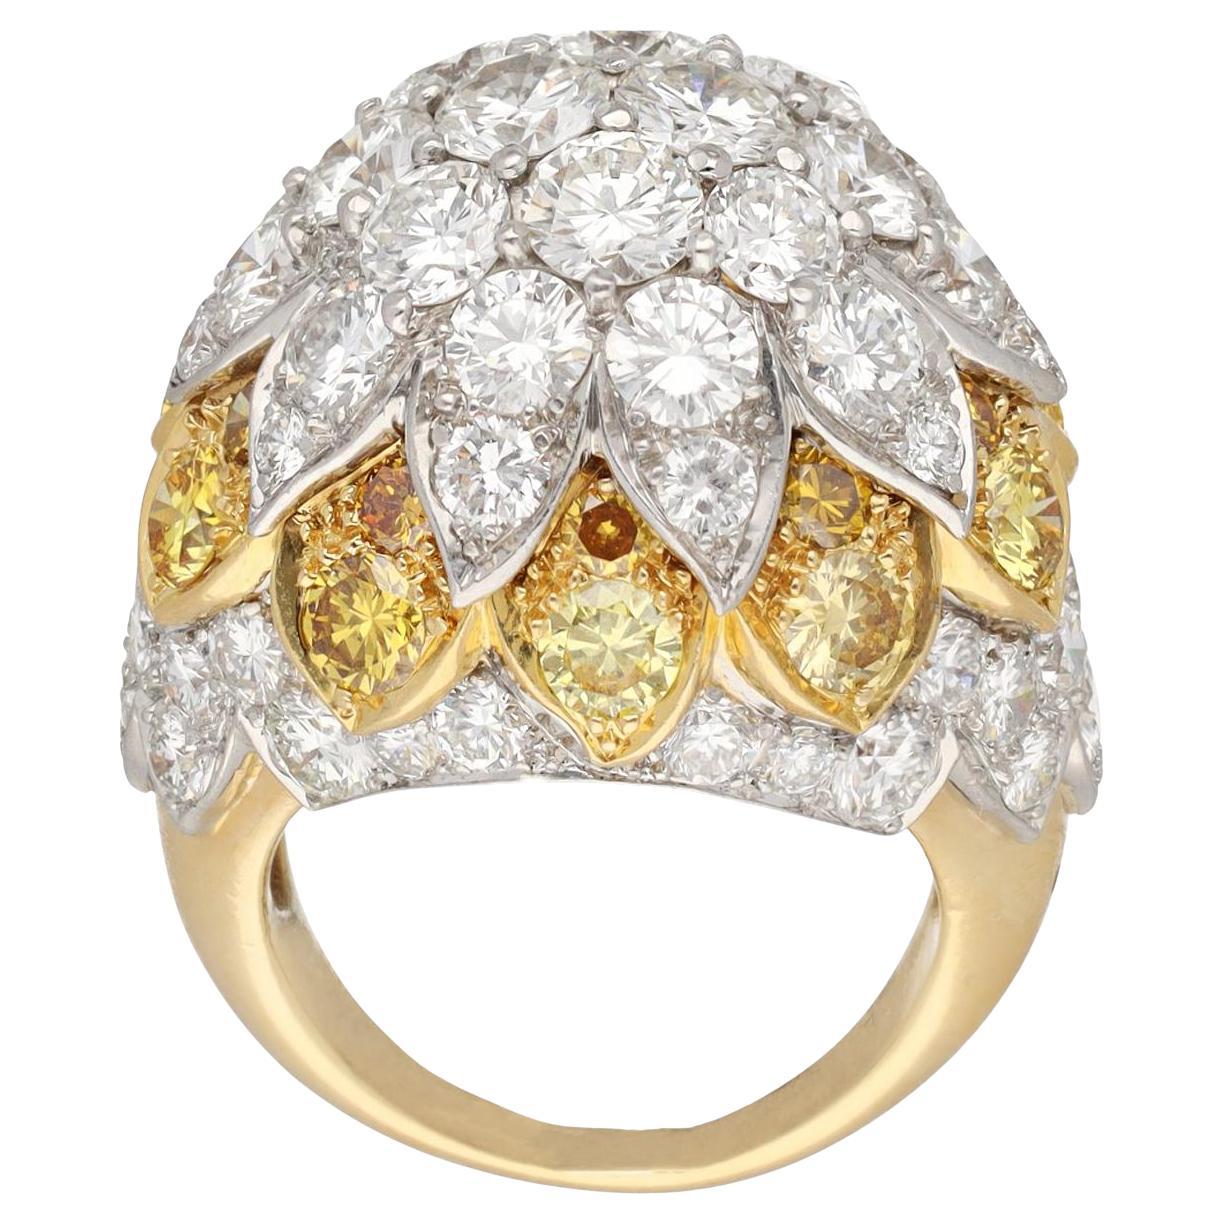 Tiffany & Co. Fancy Yellow and White Diamond Scalloped Dome Ring